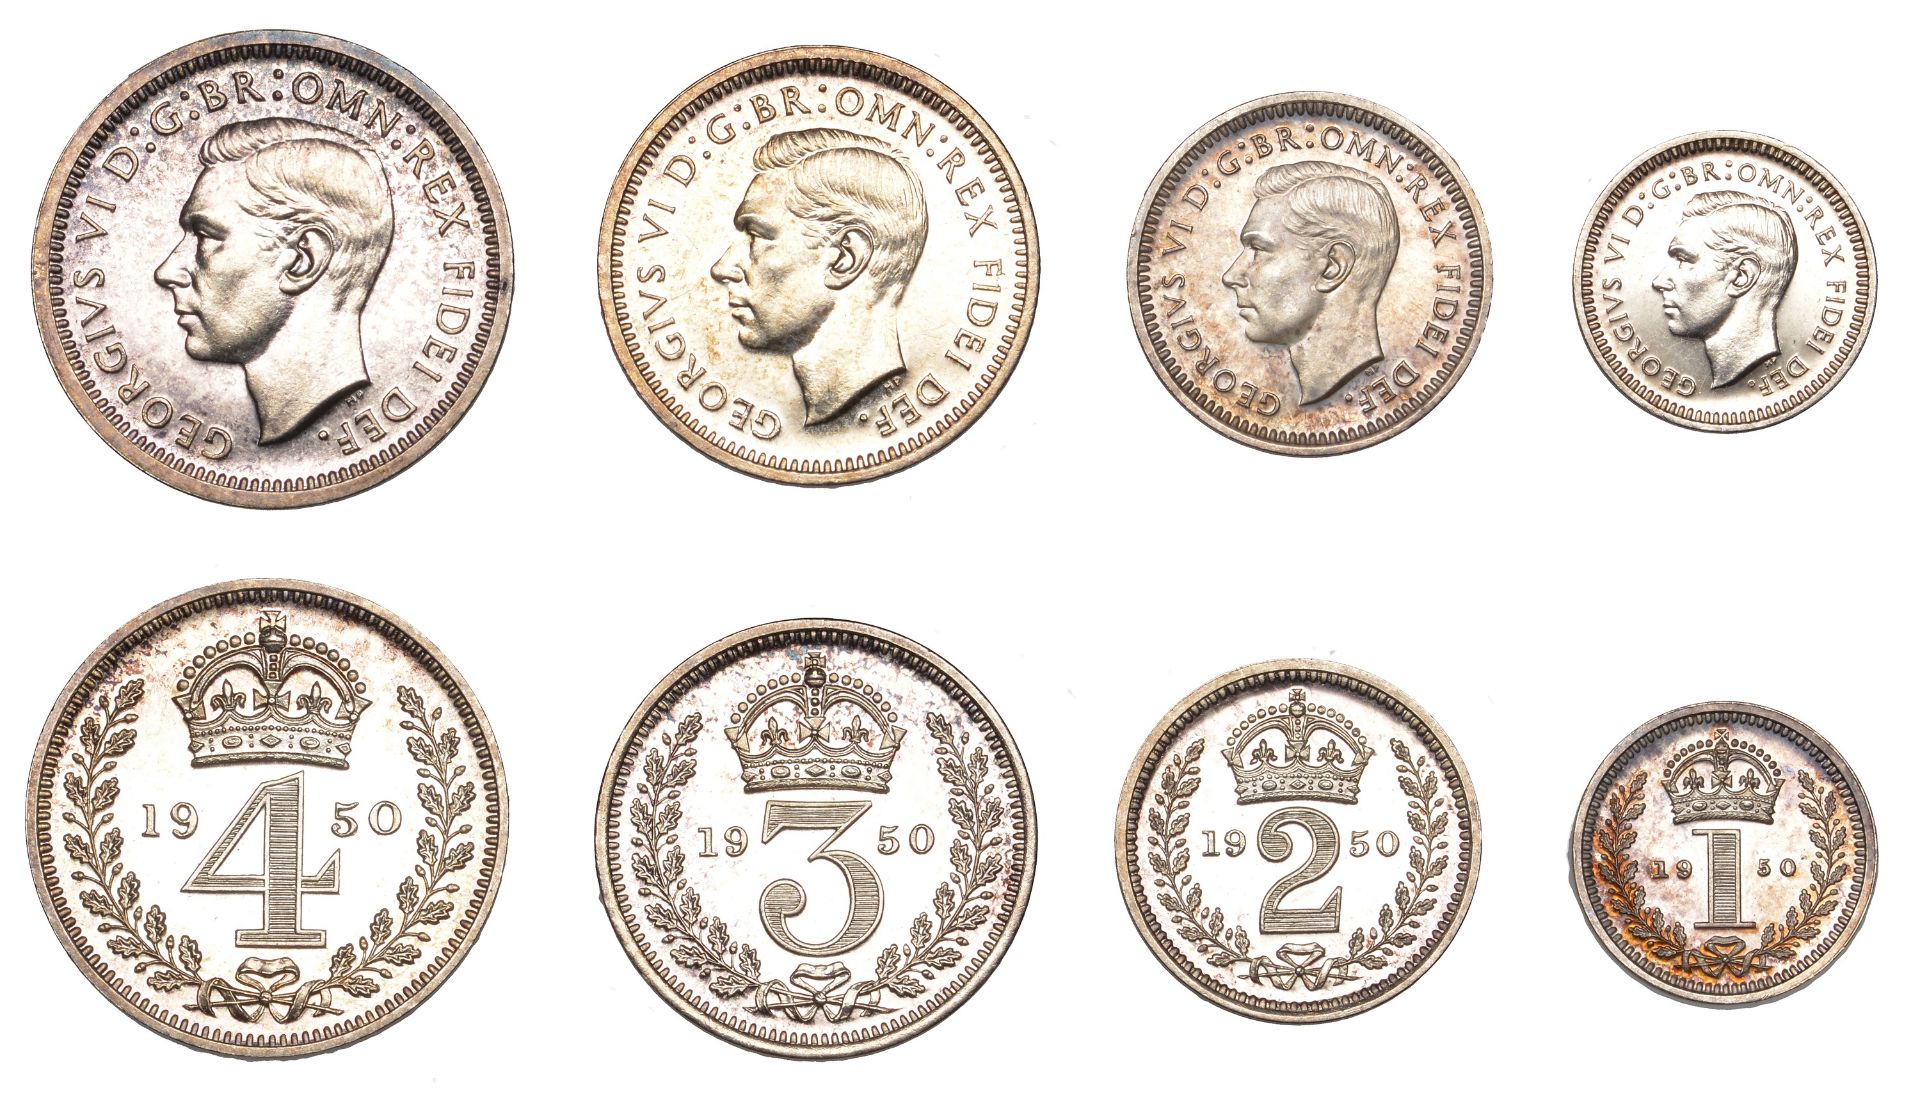 George VI (1936-1952), Maundy set, 1950 (ESC 4319; S 4096) [4]. About as struck, lightly ton...